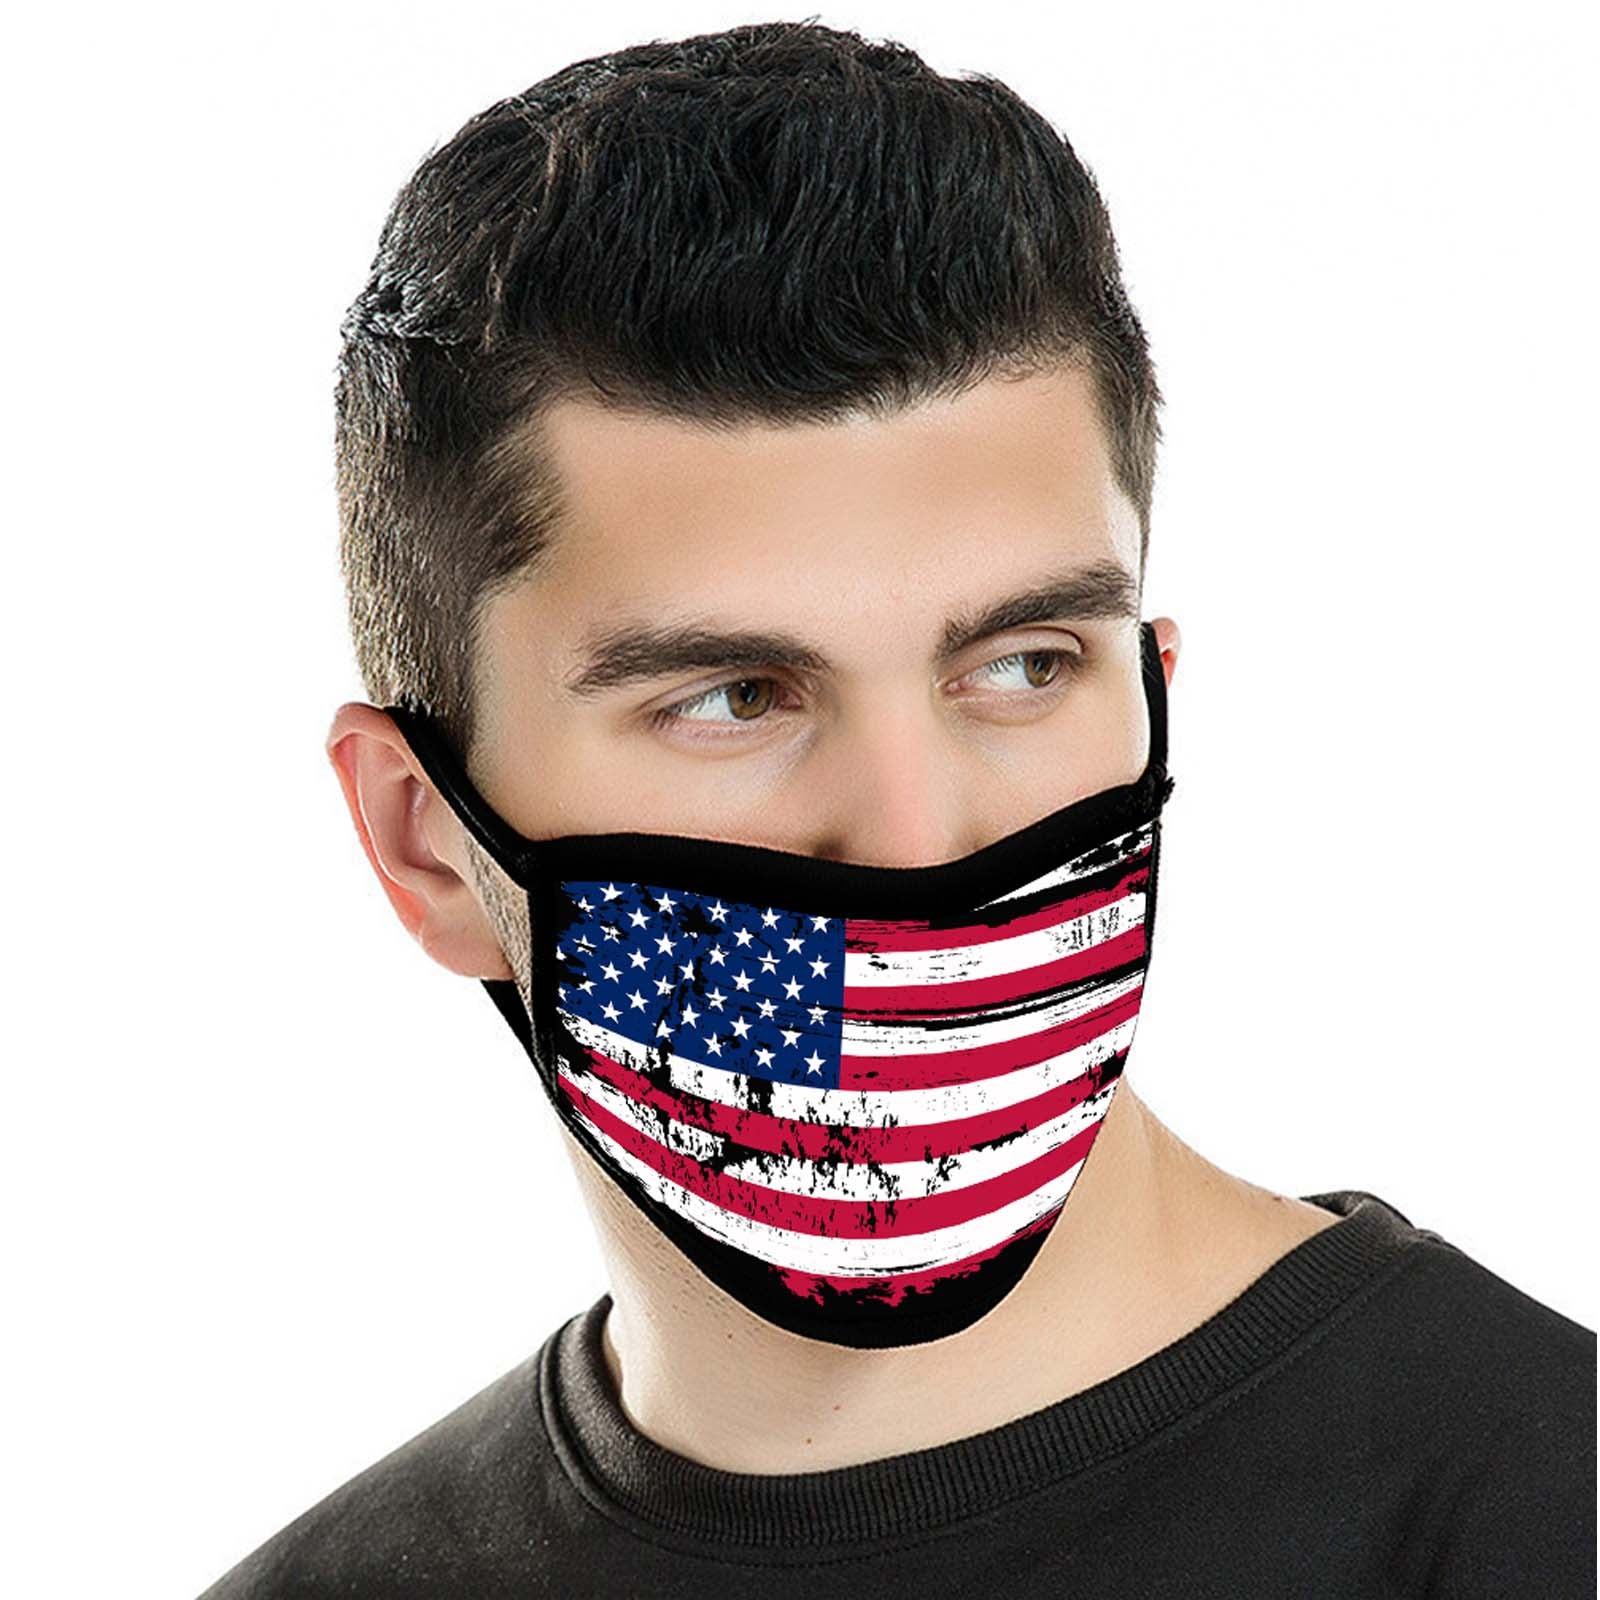 SFCM-017 American Bling Single Piece Pack US Flag Fabric Face Mask Double Layer 1PCs